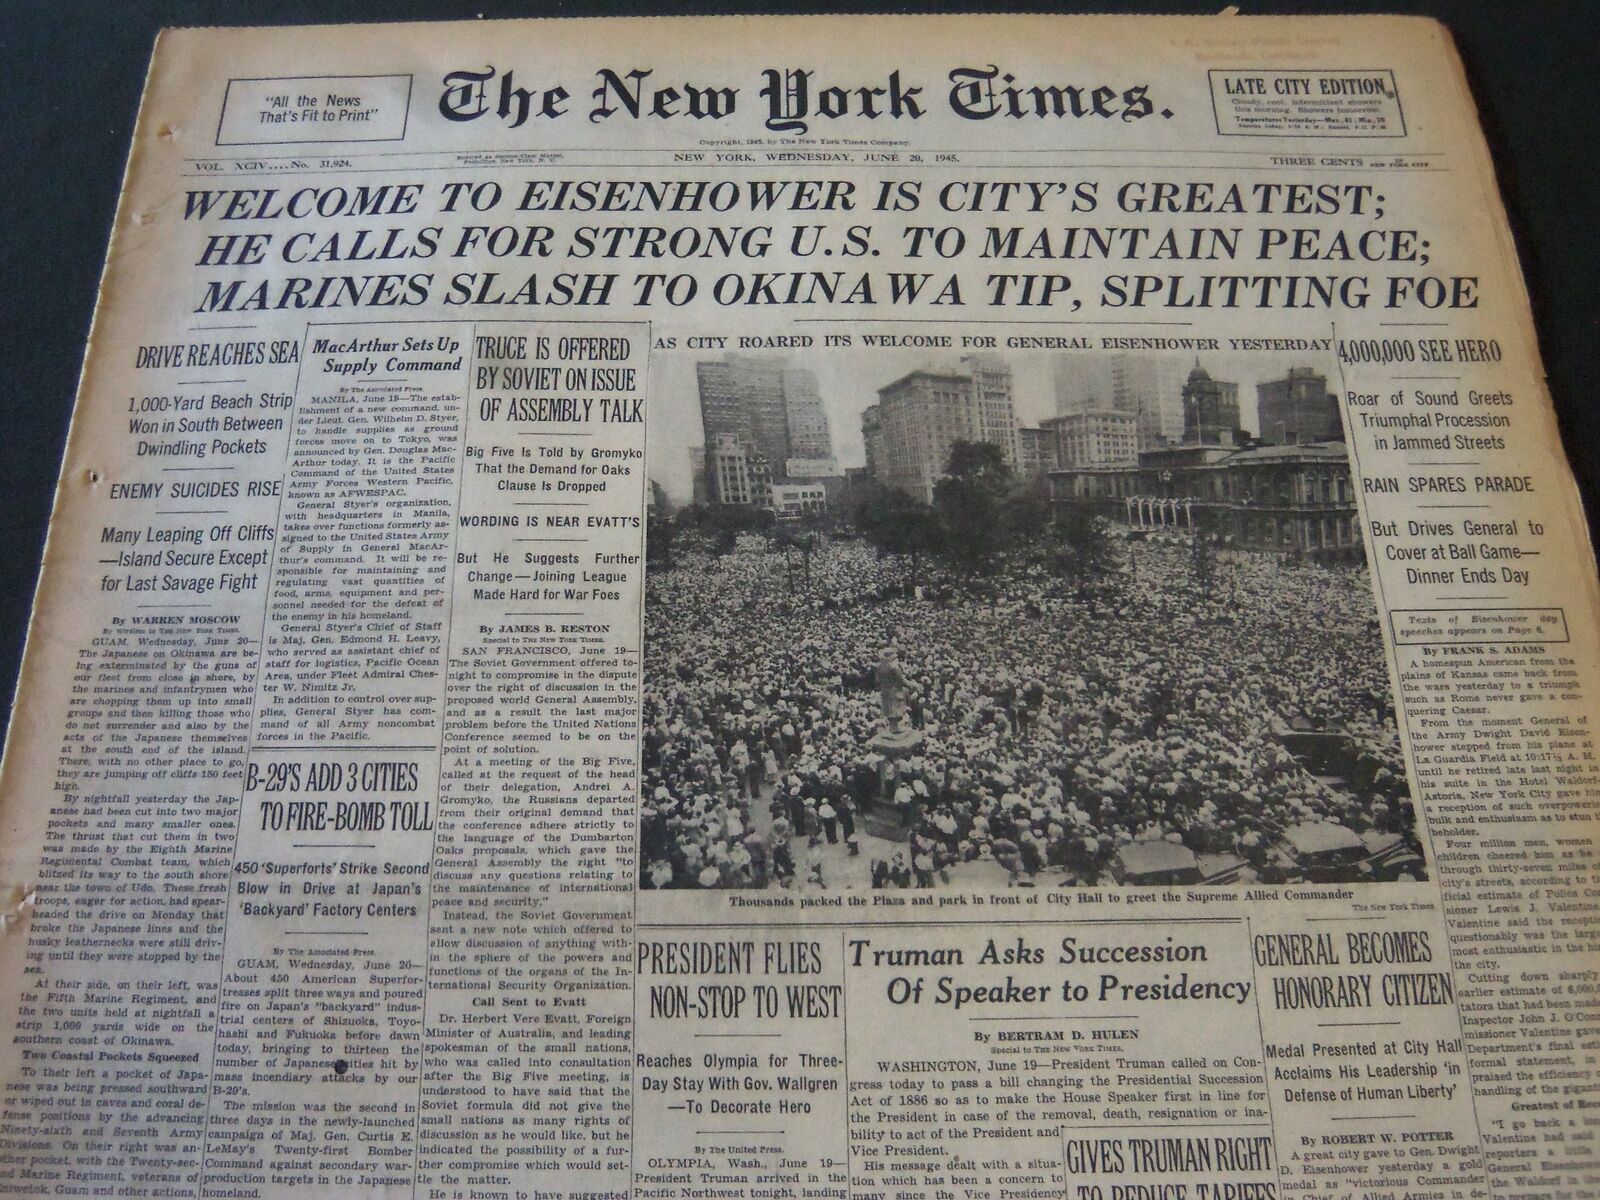 1945 JUNE 20 NEW YORK TIMES - WELCOME TO EISENHOWER IS CITY'S GREATEST - NT 5892